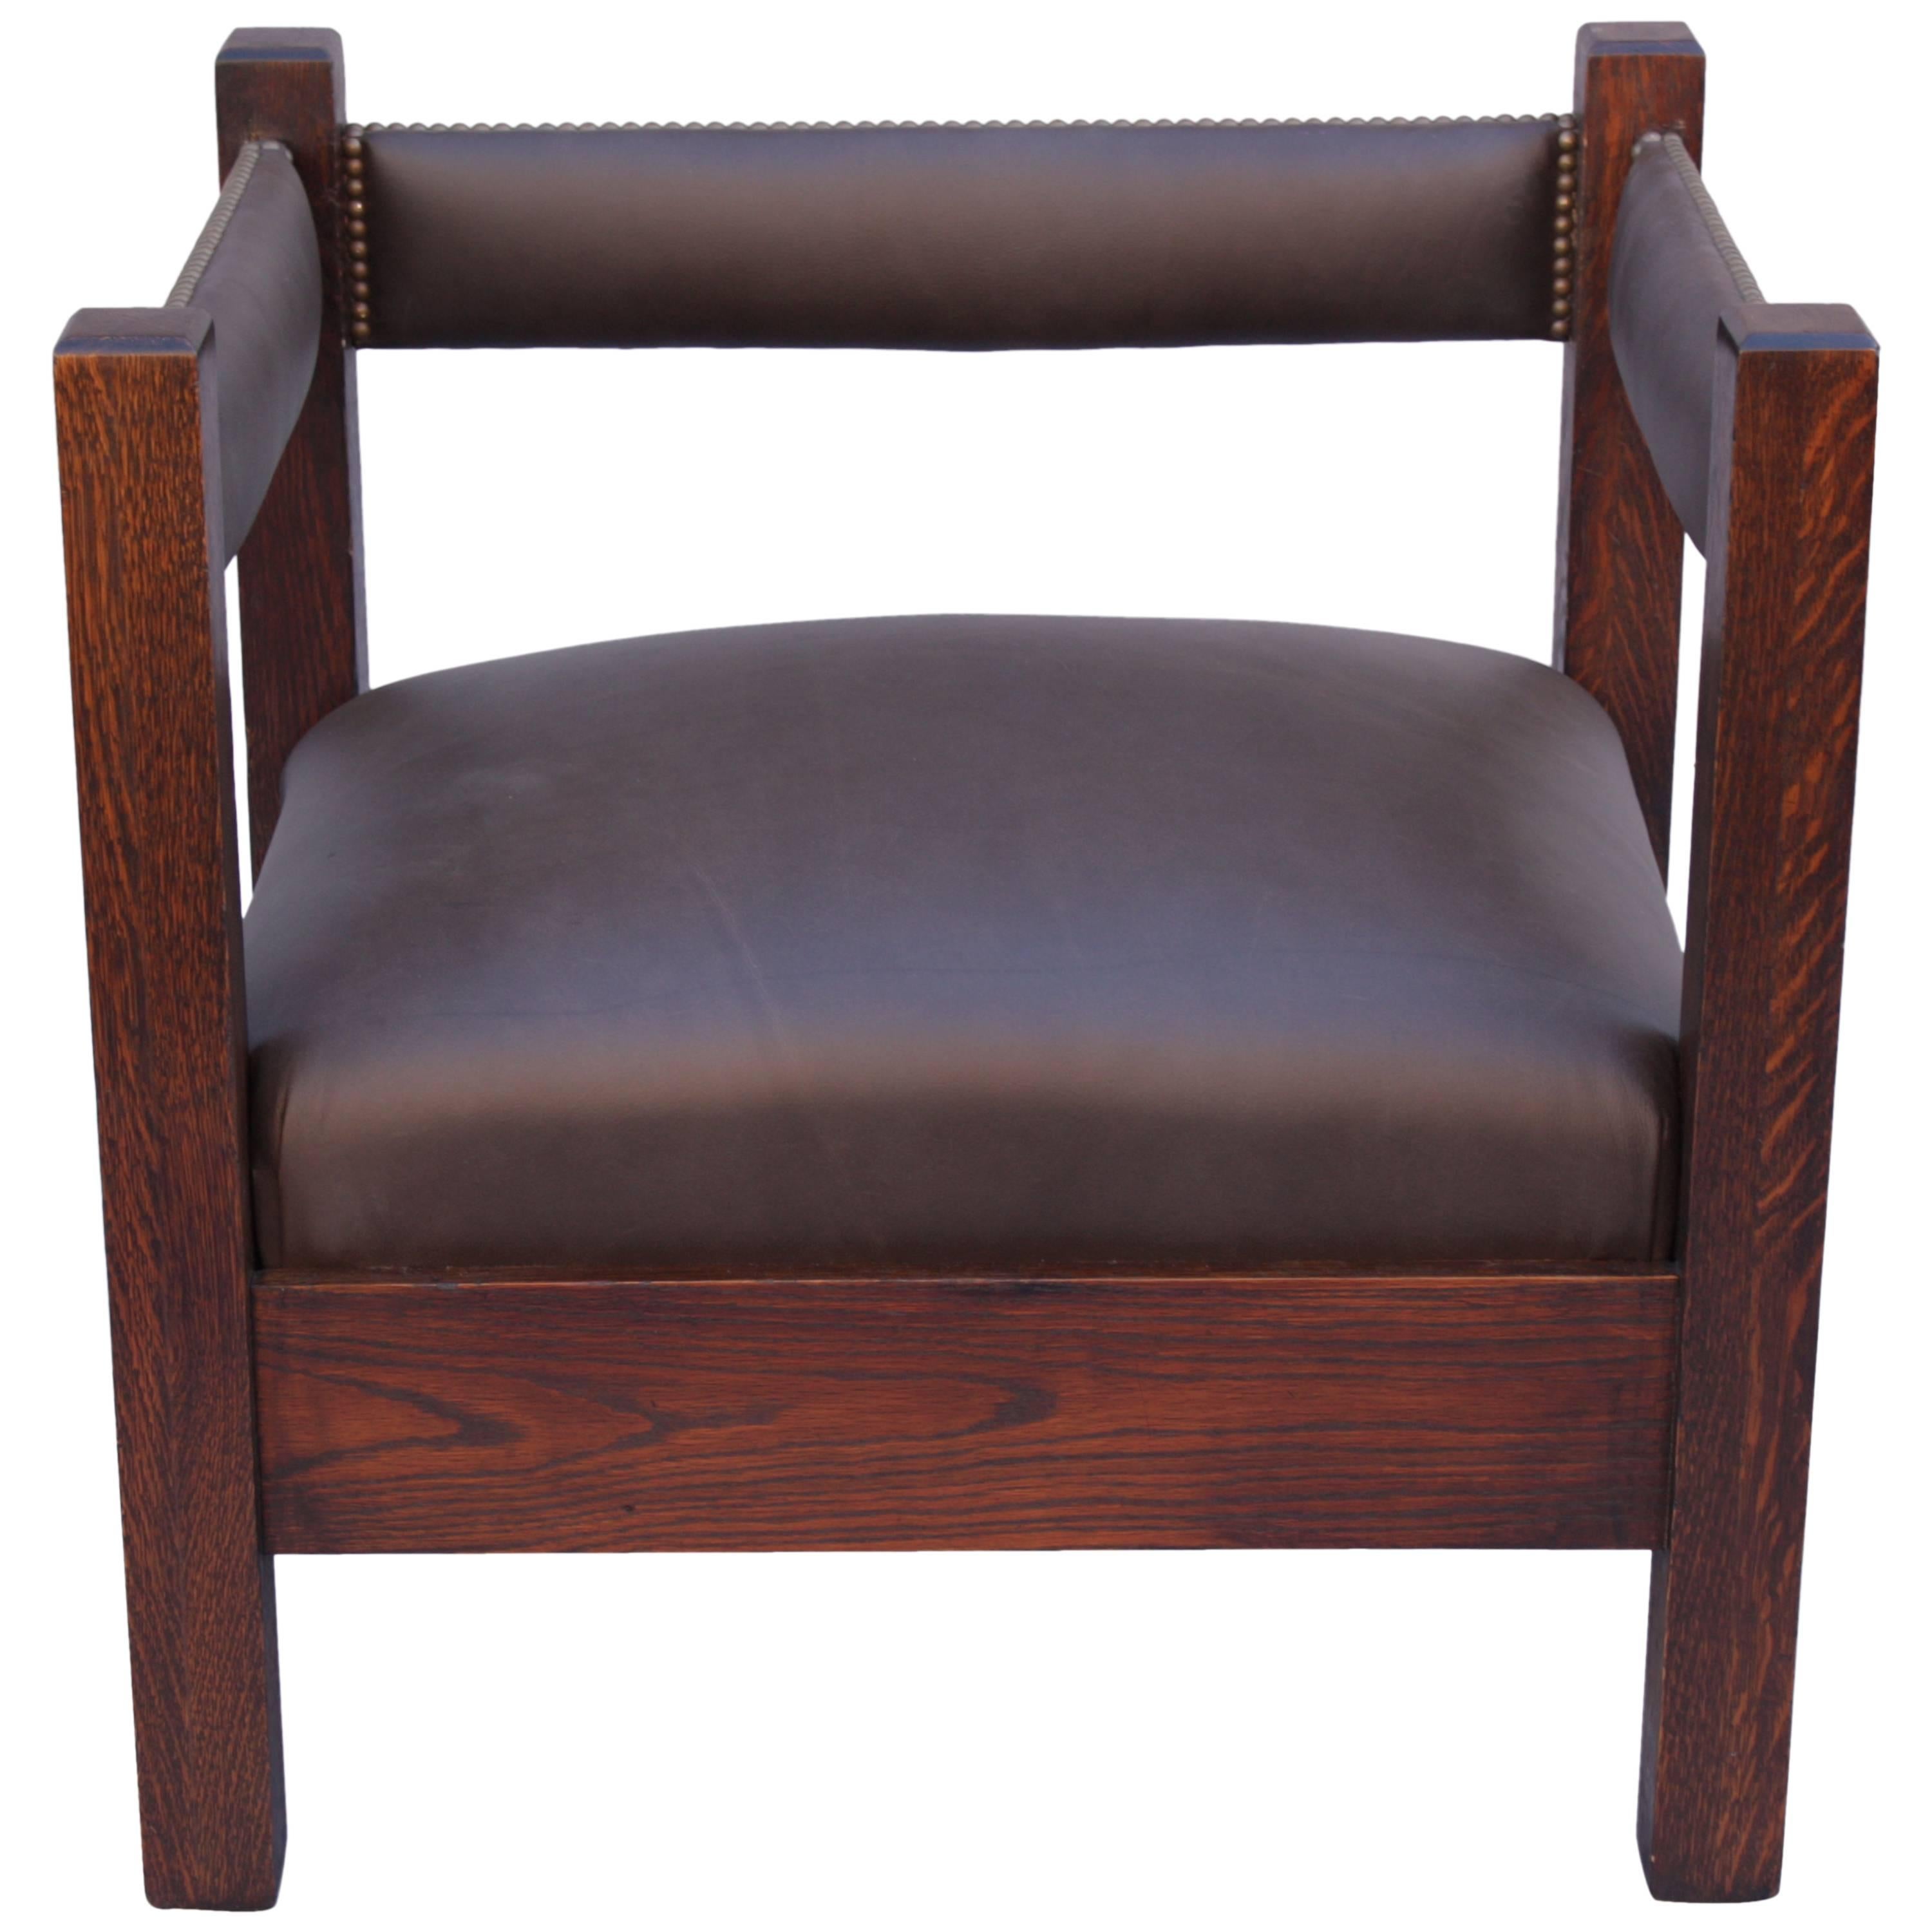 Antique Arts and Crafts Mission Cube Chair For Sale